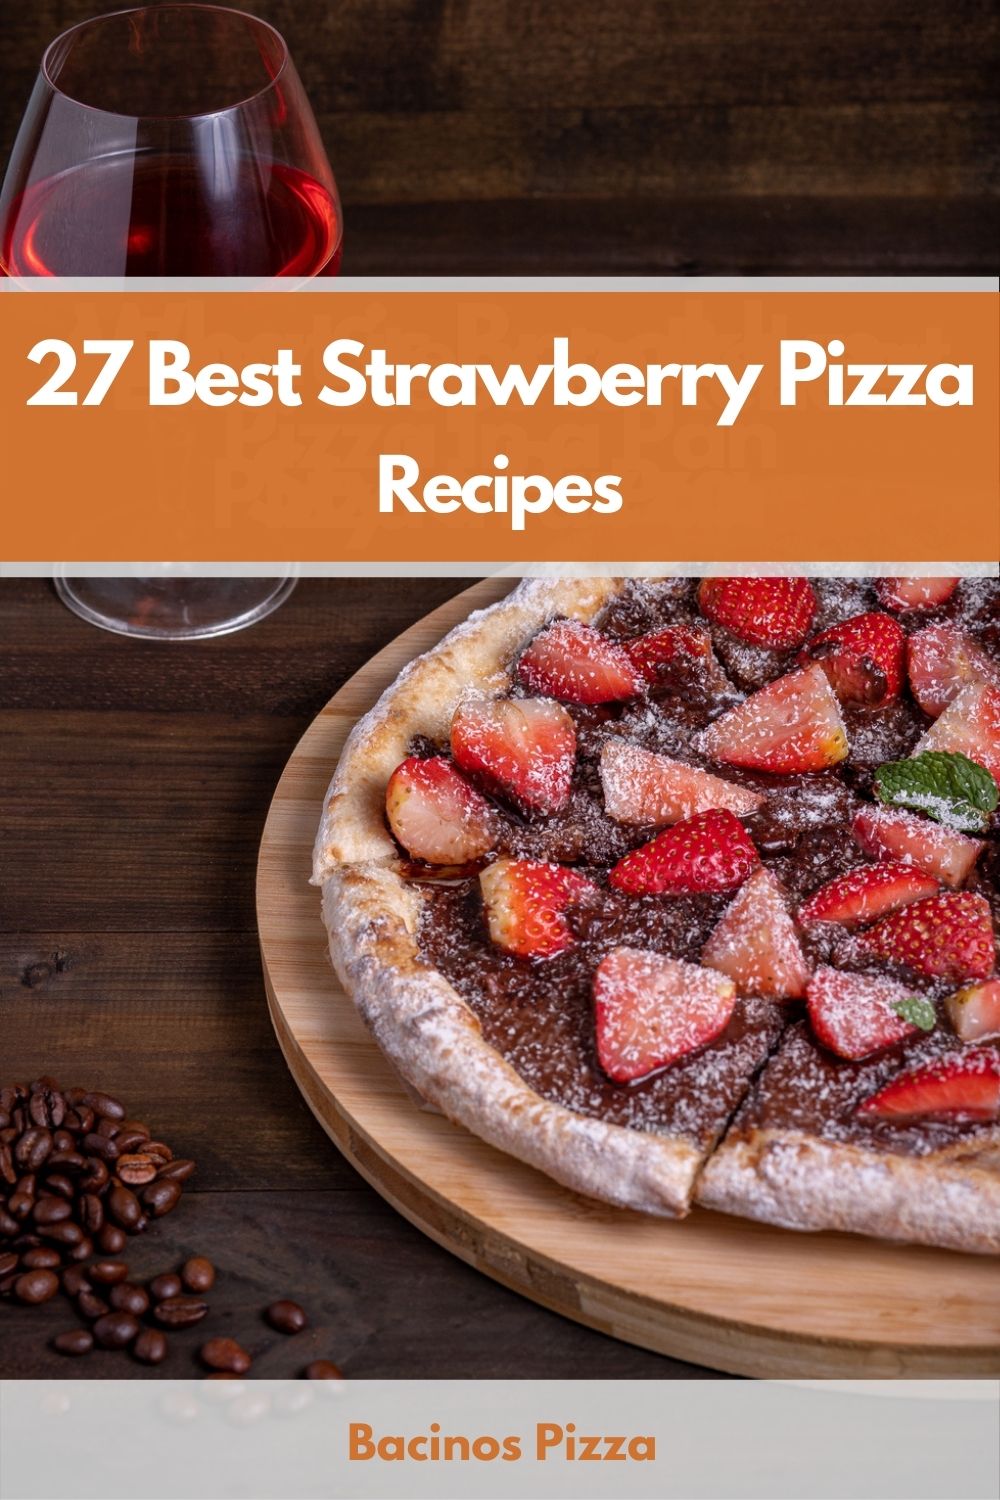 27 Best Strawberry Pizza Recipes pin